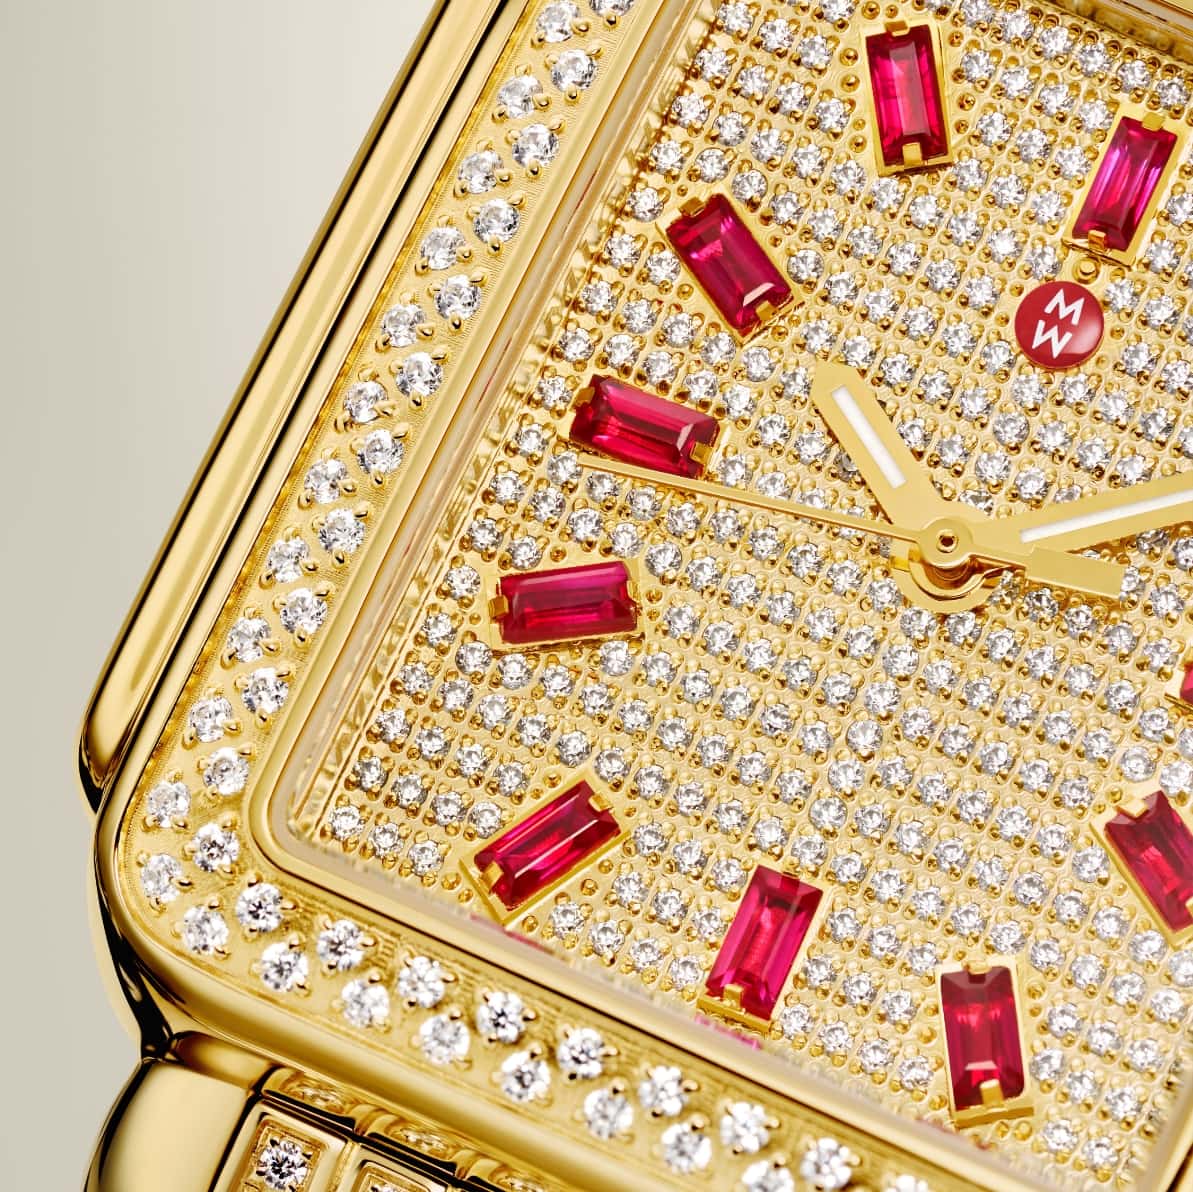 Detail shot of Deco Ruby Pavé watch in all-over gold and diamonds with 12 ruby baguettes